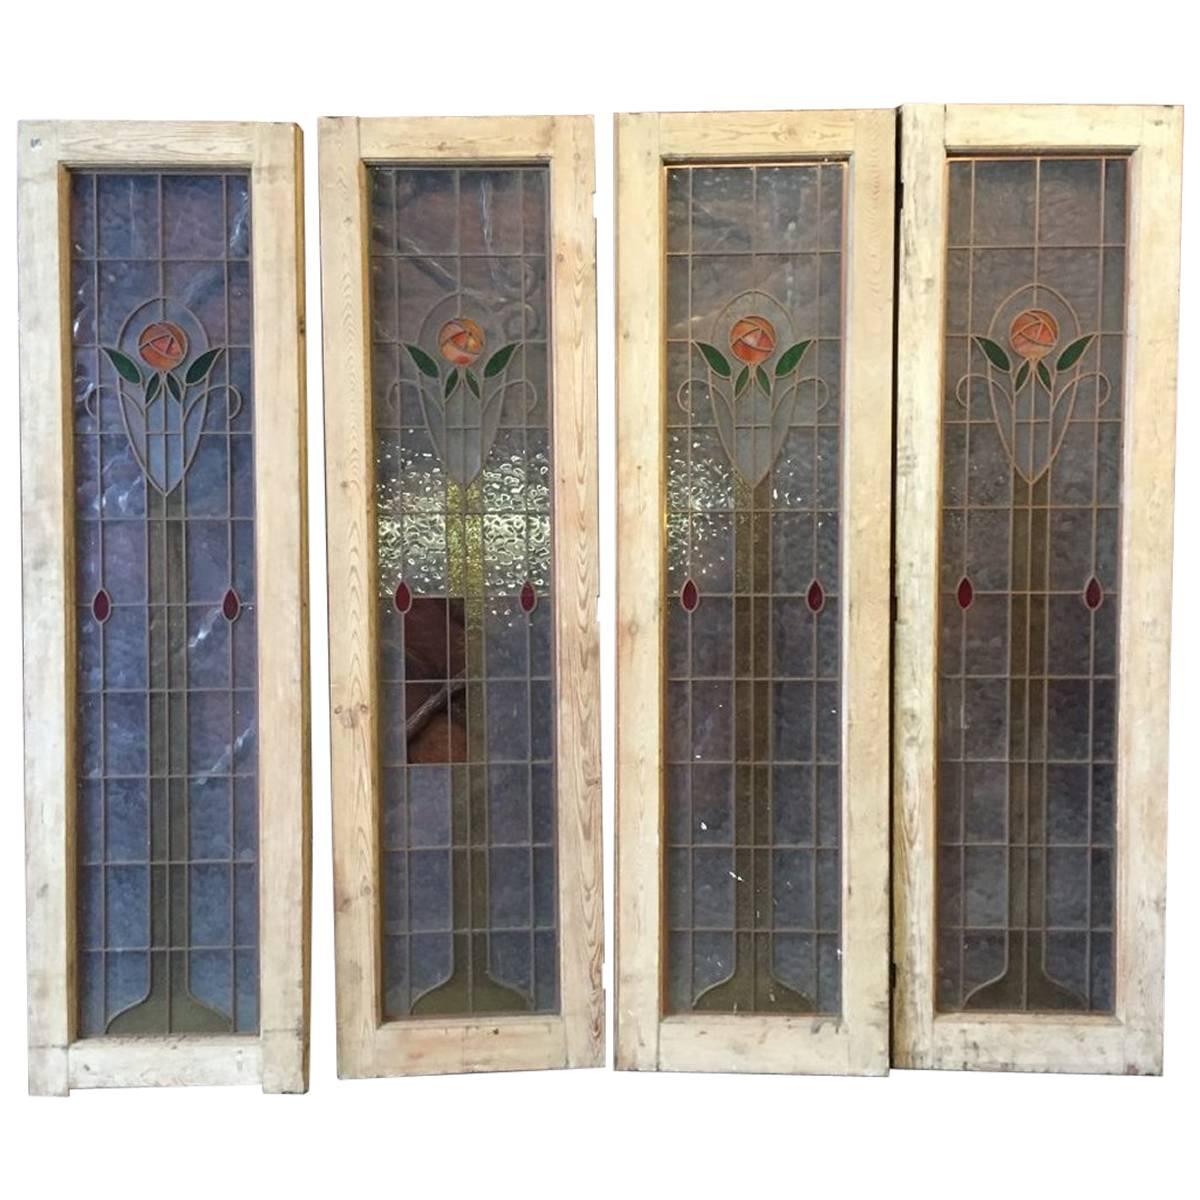 Four Arts & Crafts Stained Glass Doors with Stylized Glasgow Roses Set in Copper